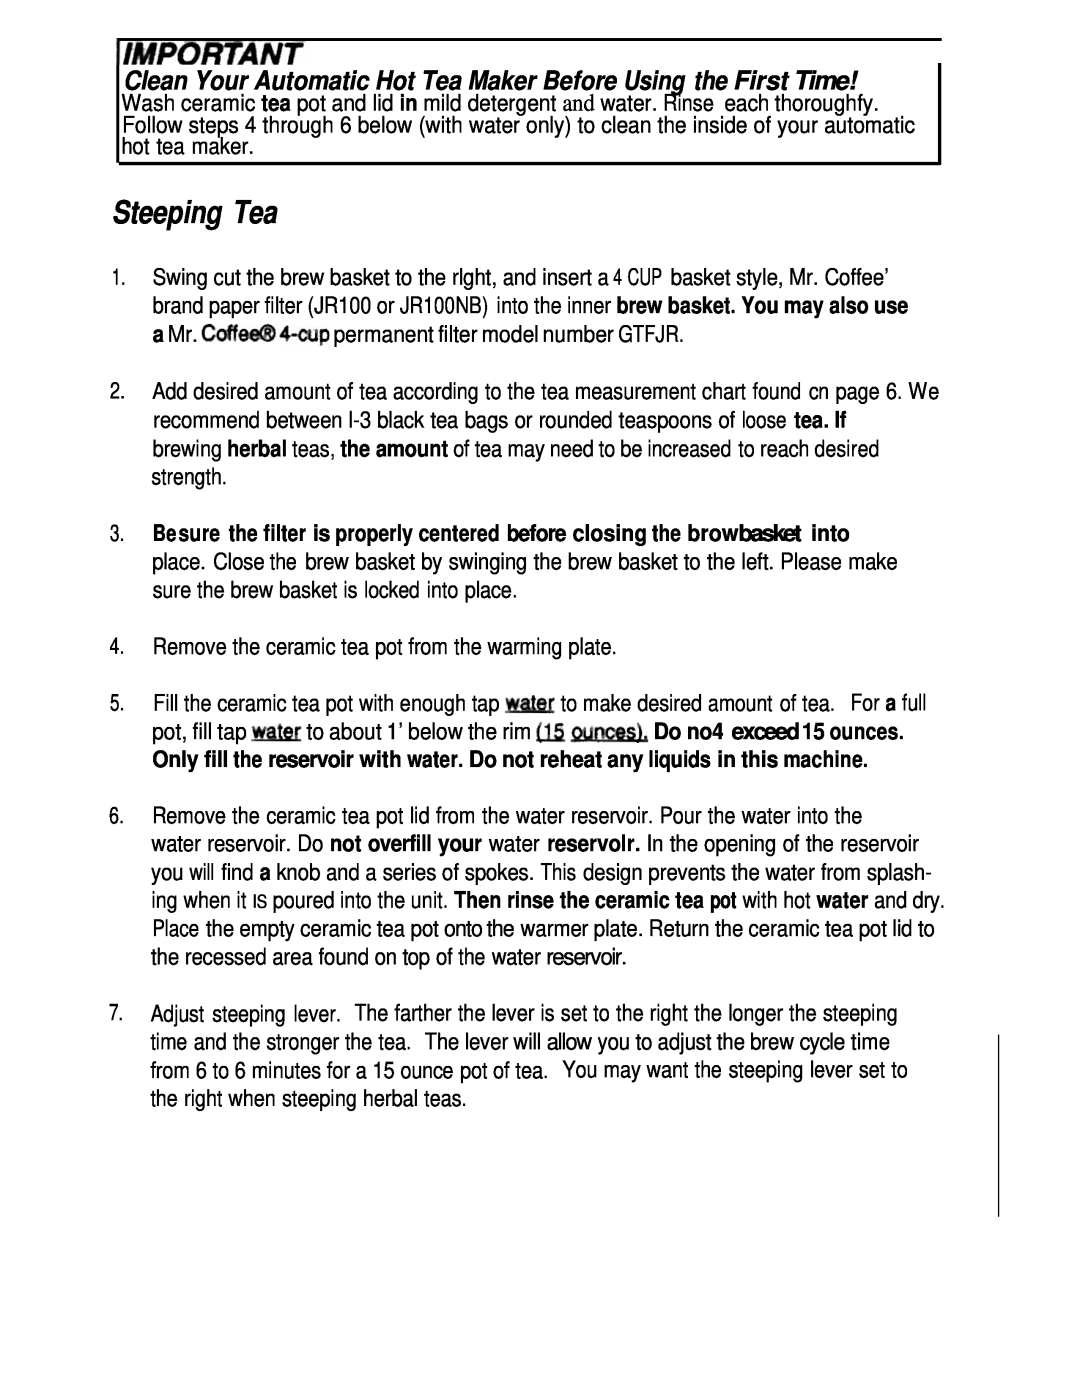 Sunbeam HTM11 operating instructions Steeping Tea, Clean Your Automatic Hot Tea Maker Before Using the First Time 